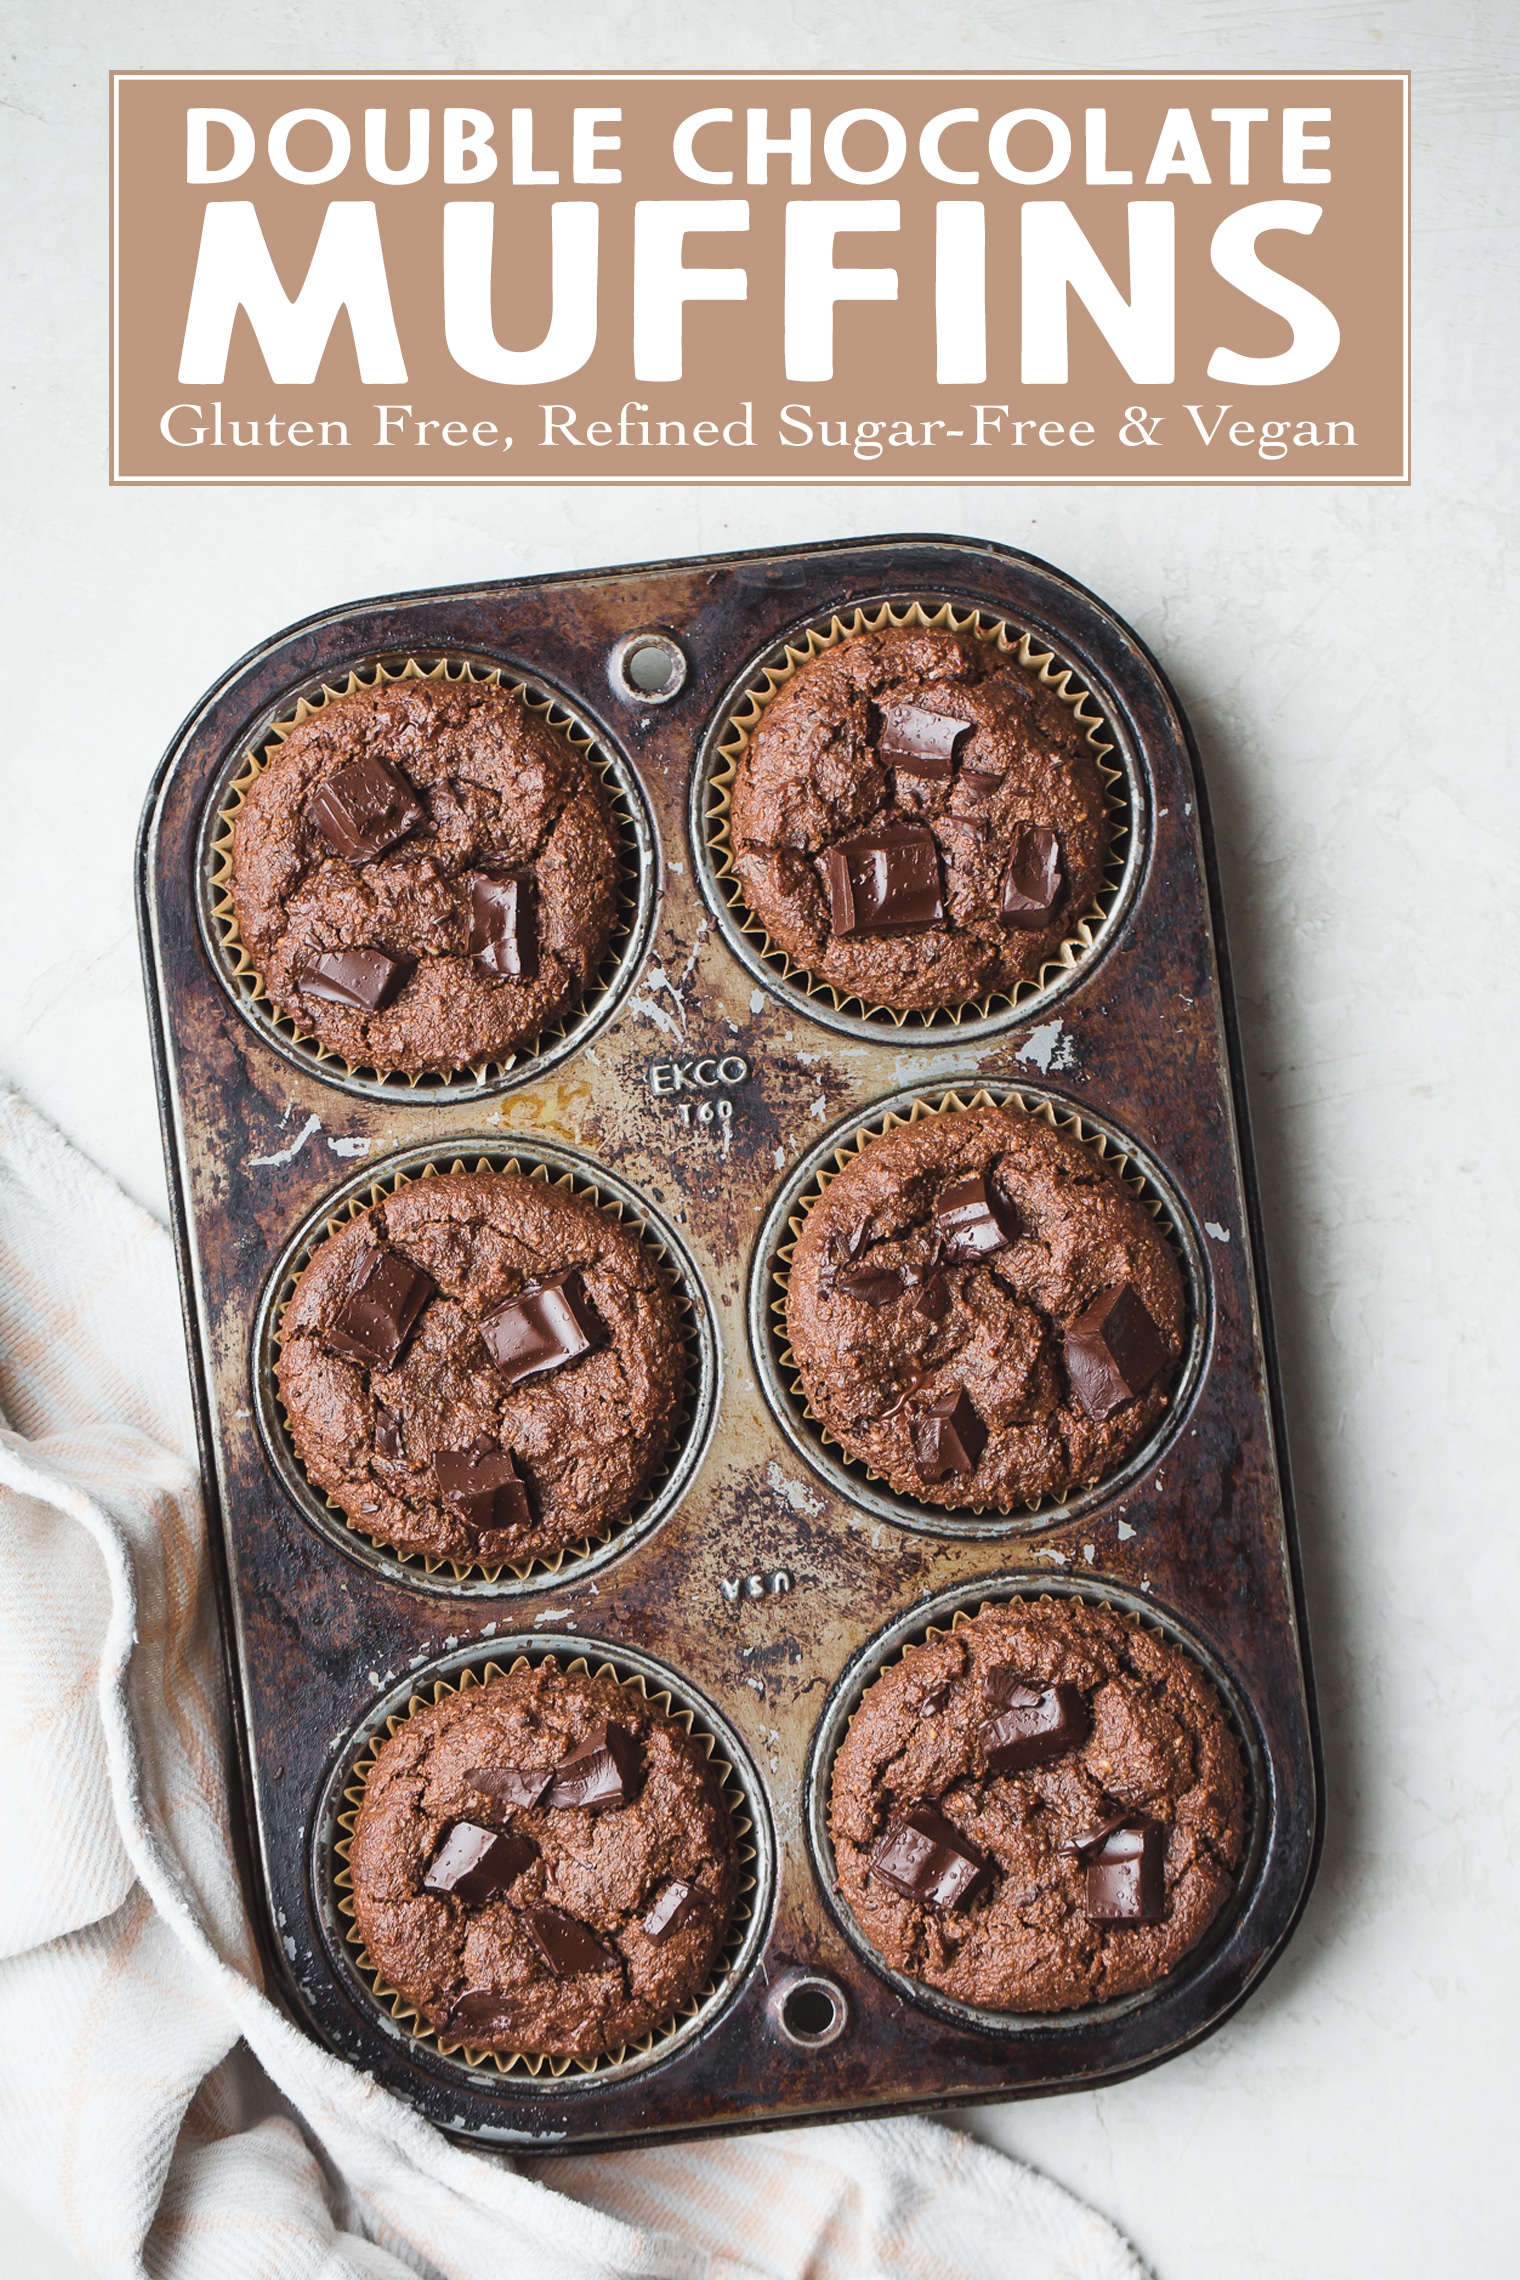 These Gluten-Free Vegan Double Chocolate Muffins are tender, super chocolatey, and absolutely delicious. They are perfect for chocolate lovers!